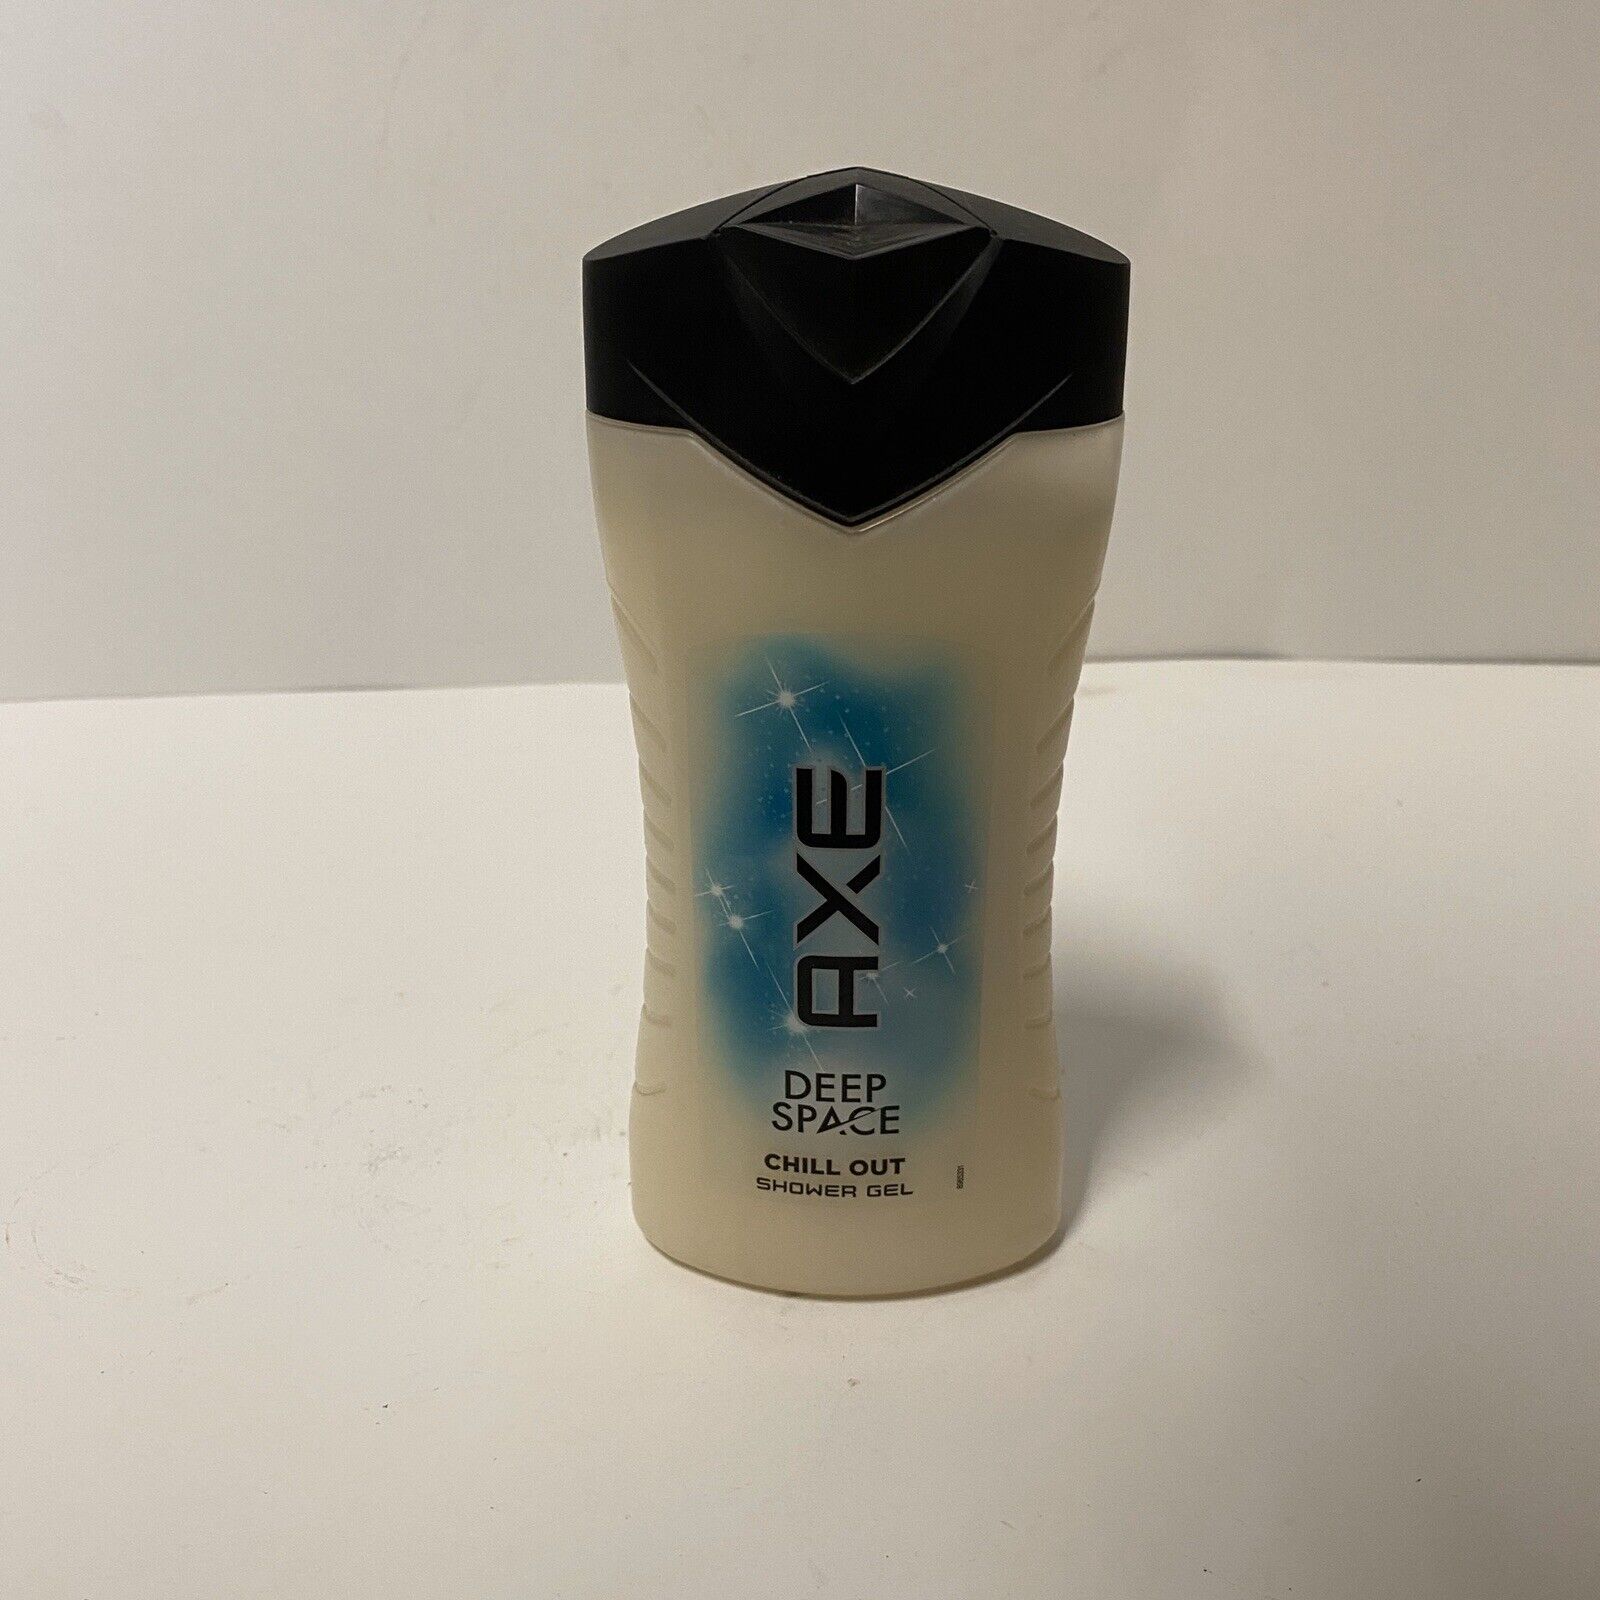 Axe Deep Space Chill Out Shower Gel HTF